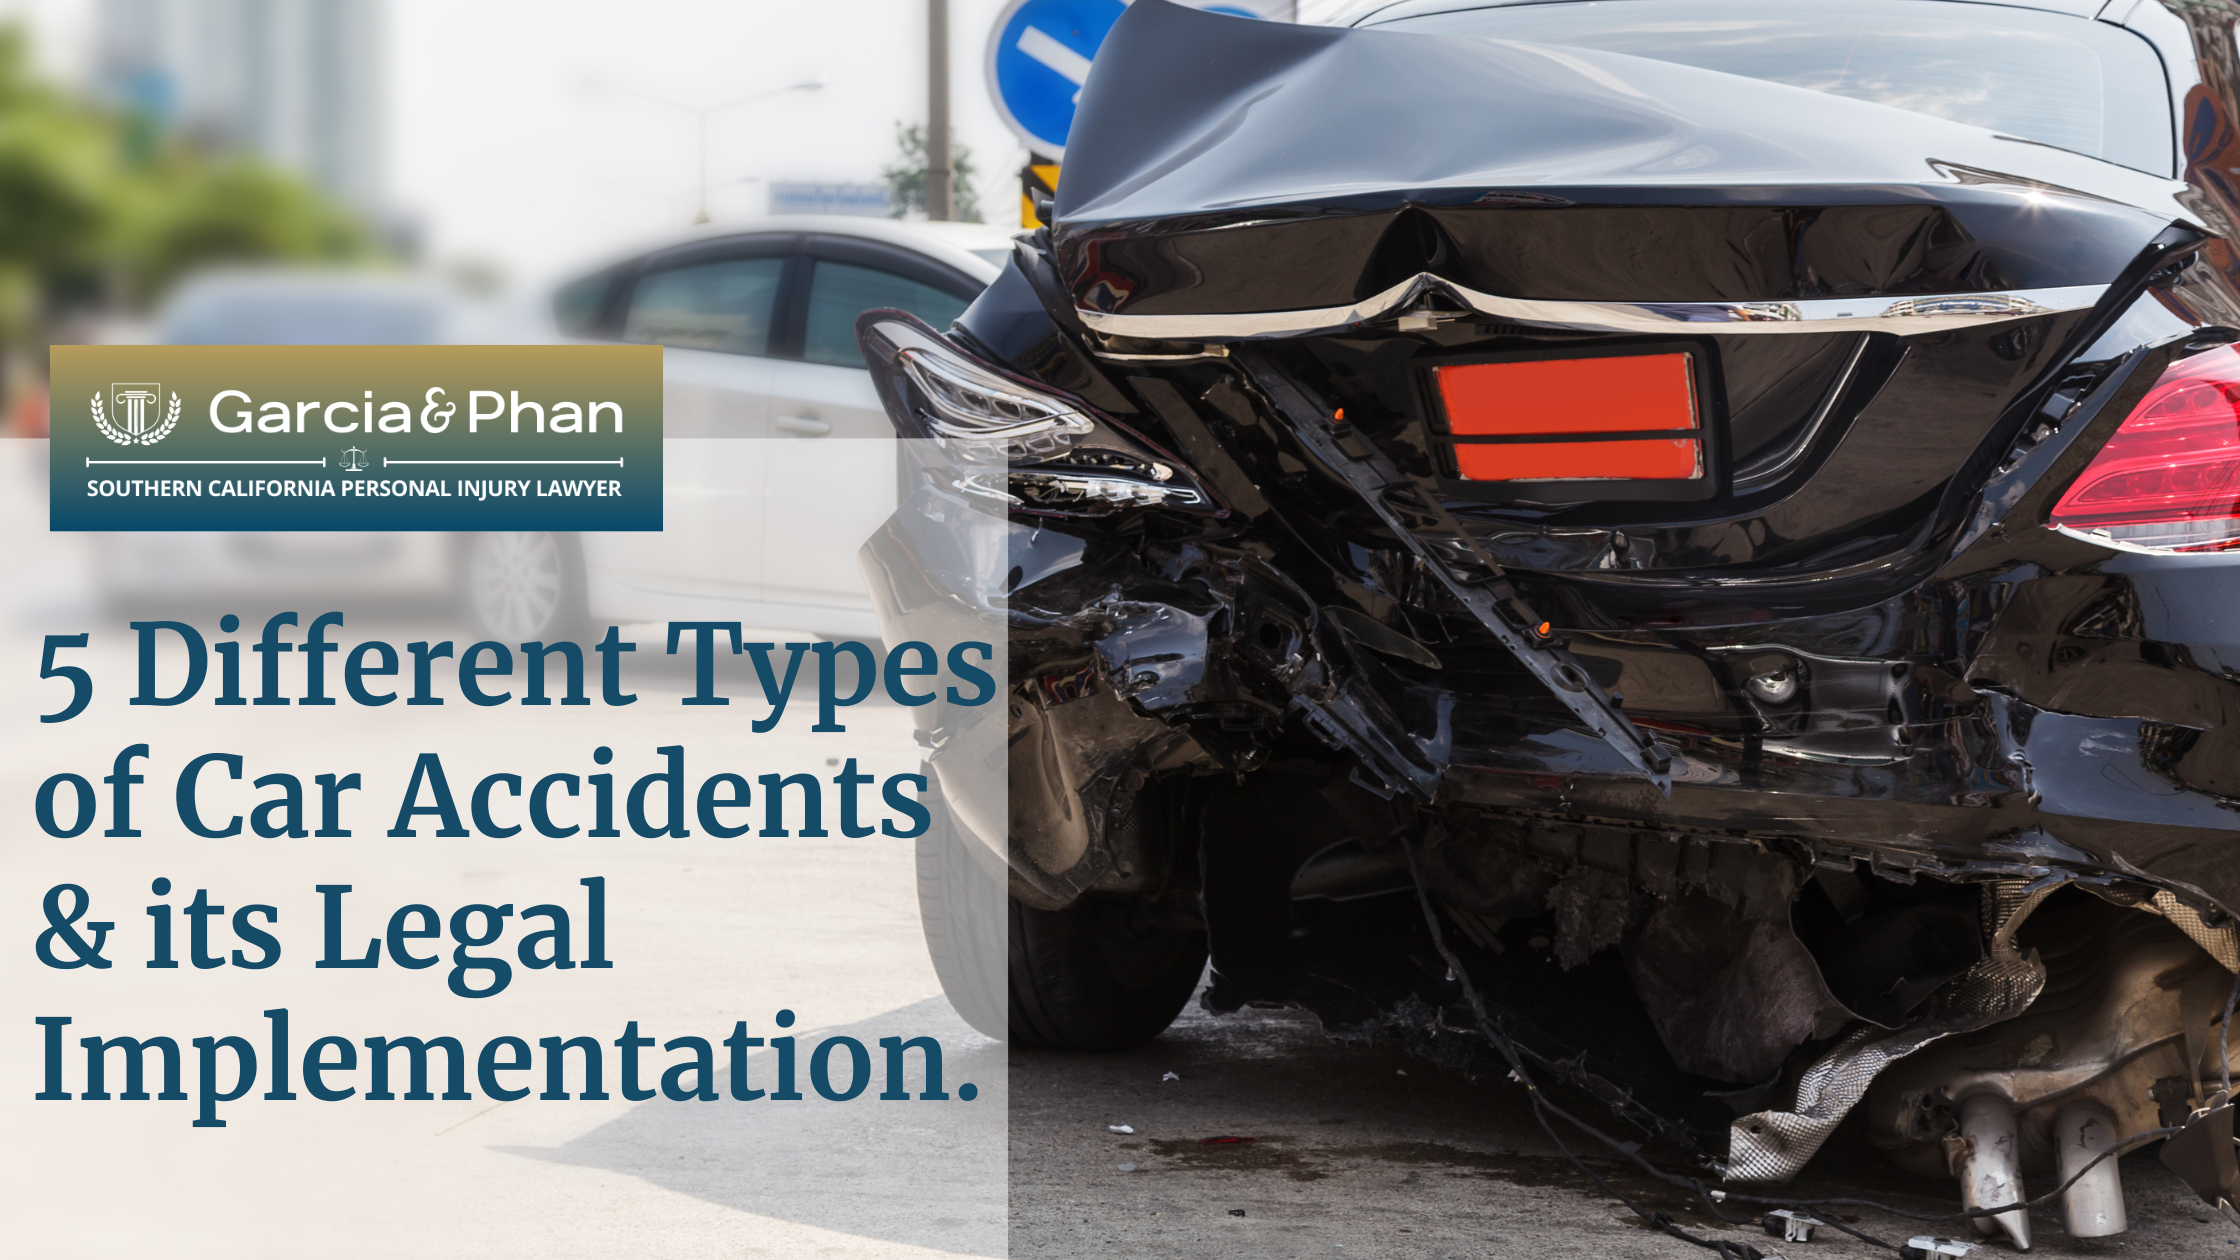 5 Different Types of Car Accidents & its Legal Implementation. | GP